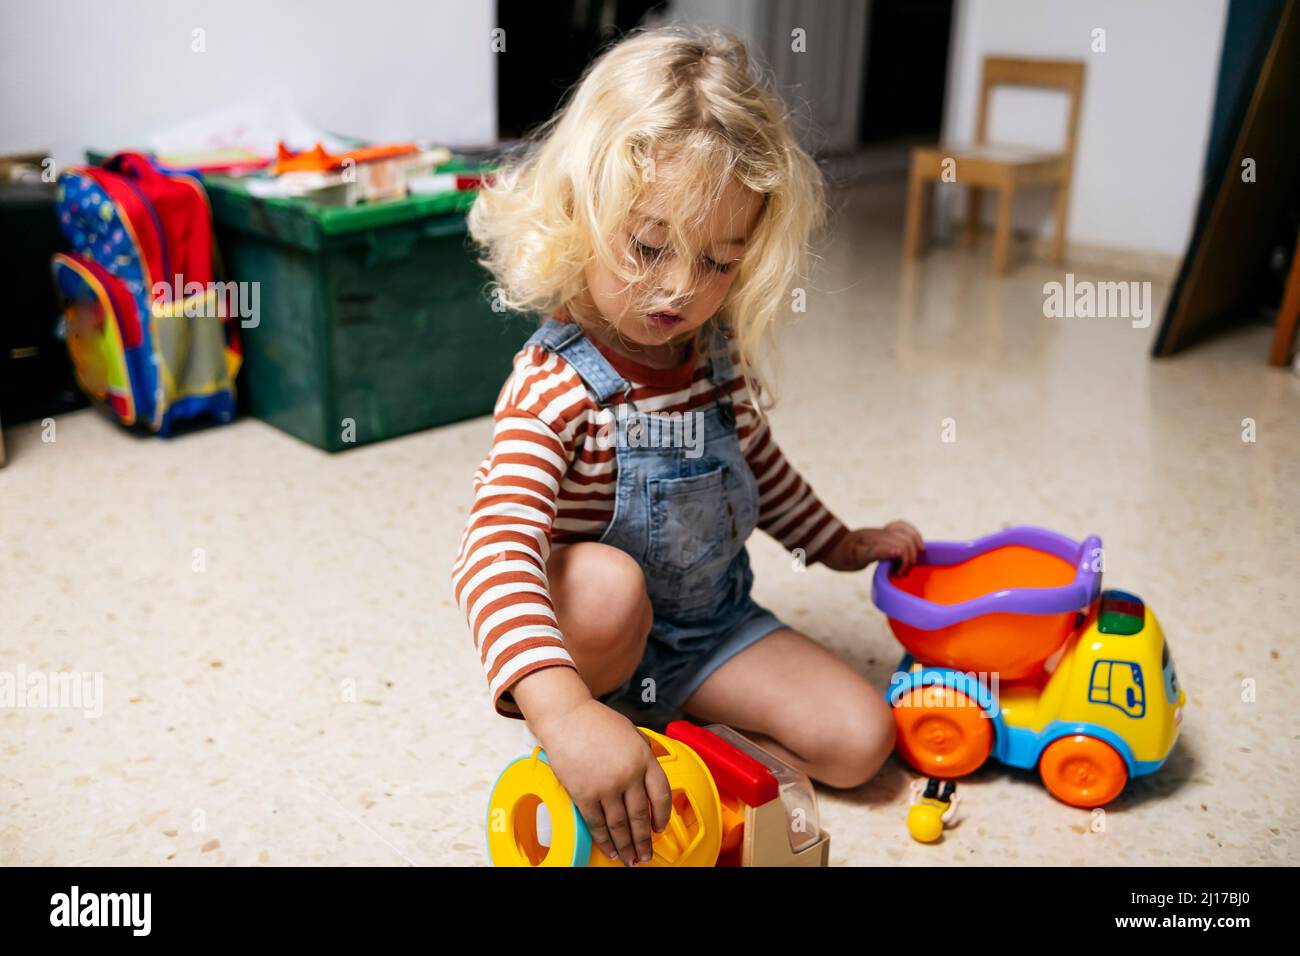 Blond boy playing with toy cars on floor at home Stock Photo